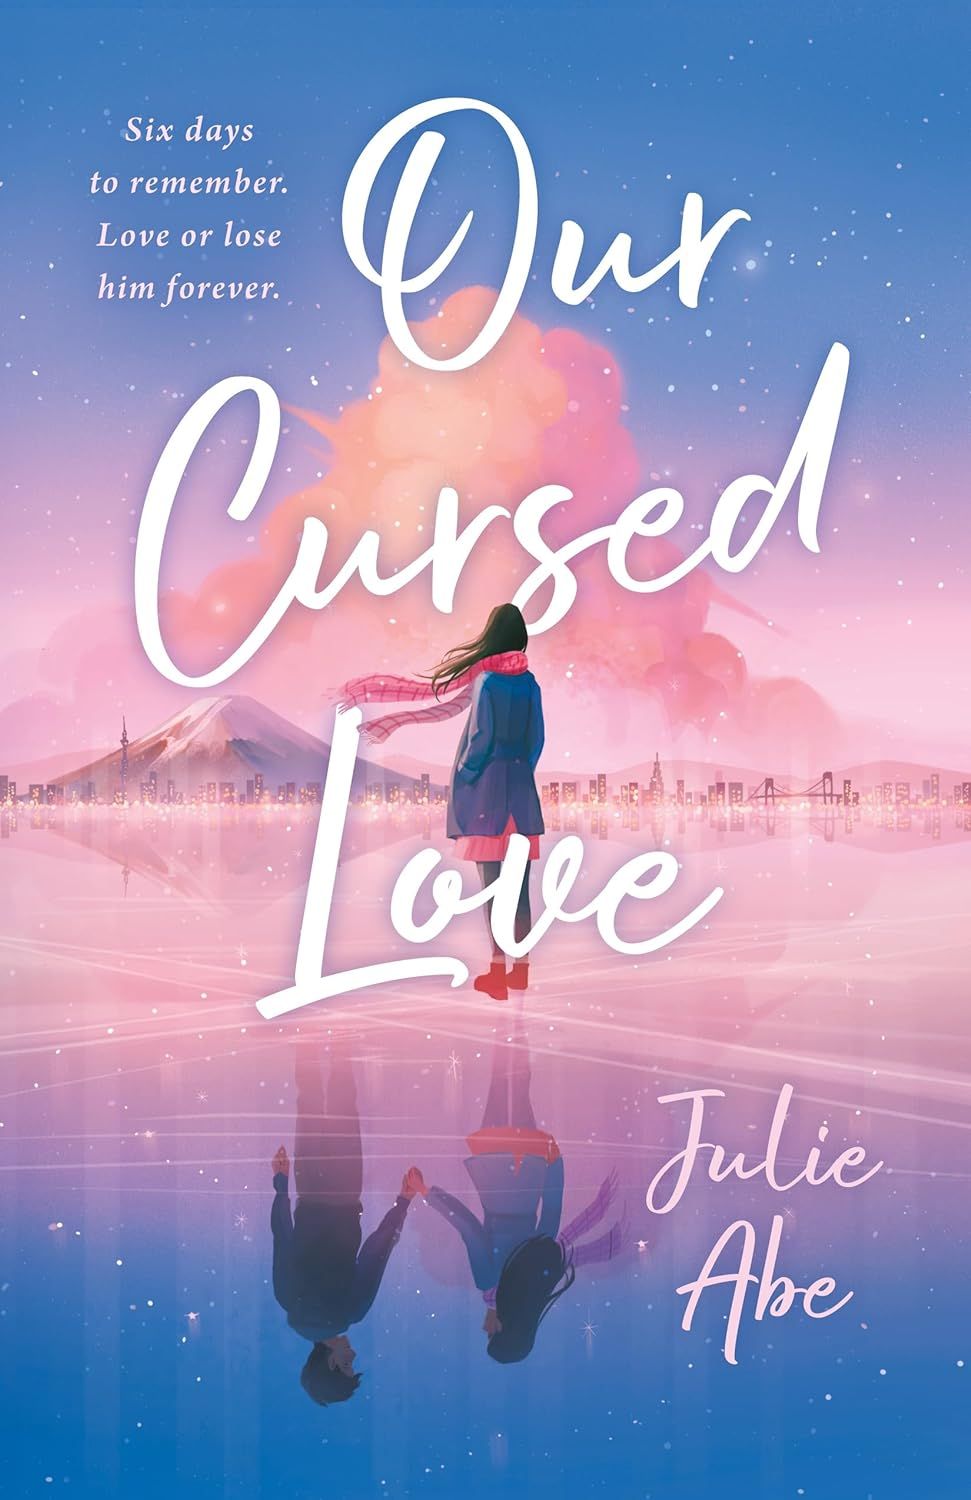 Our Cursed Love cover